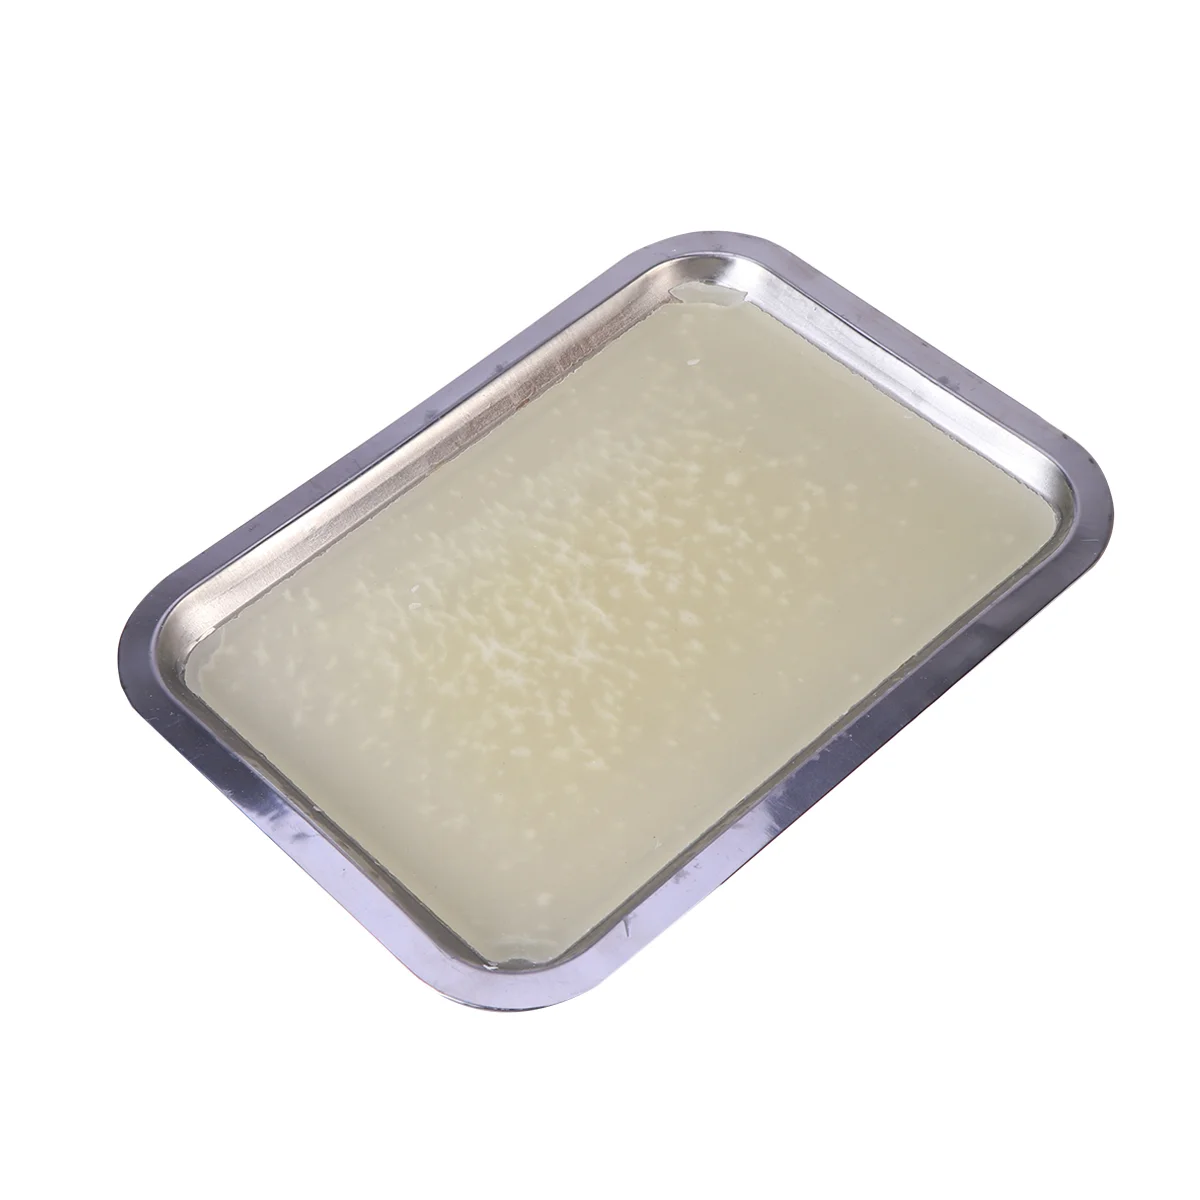 

Wax Dissecting Tray Stainless Steel Thicken Dissection Pan Biological for Junior Senior School Laboratory ( 18x25cm )